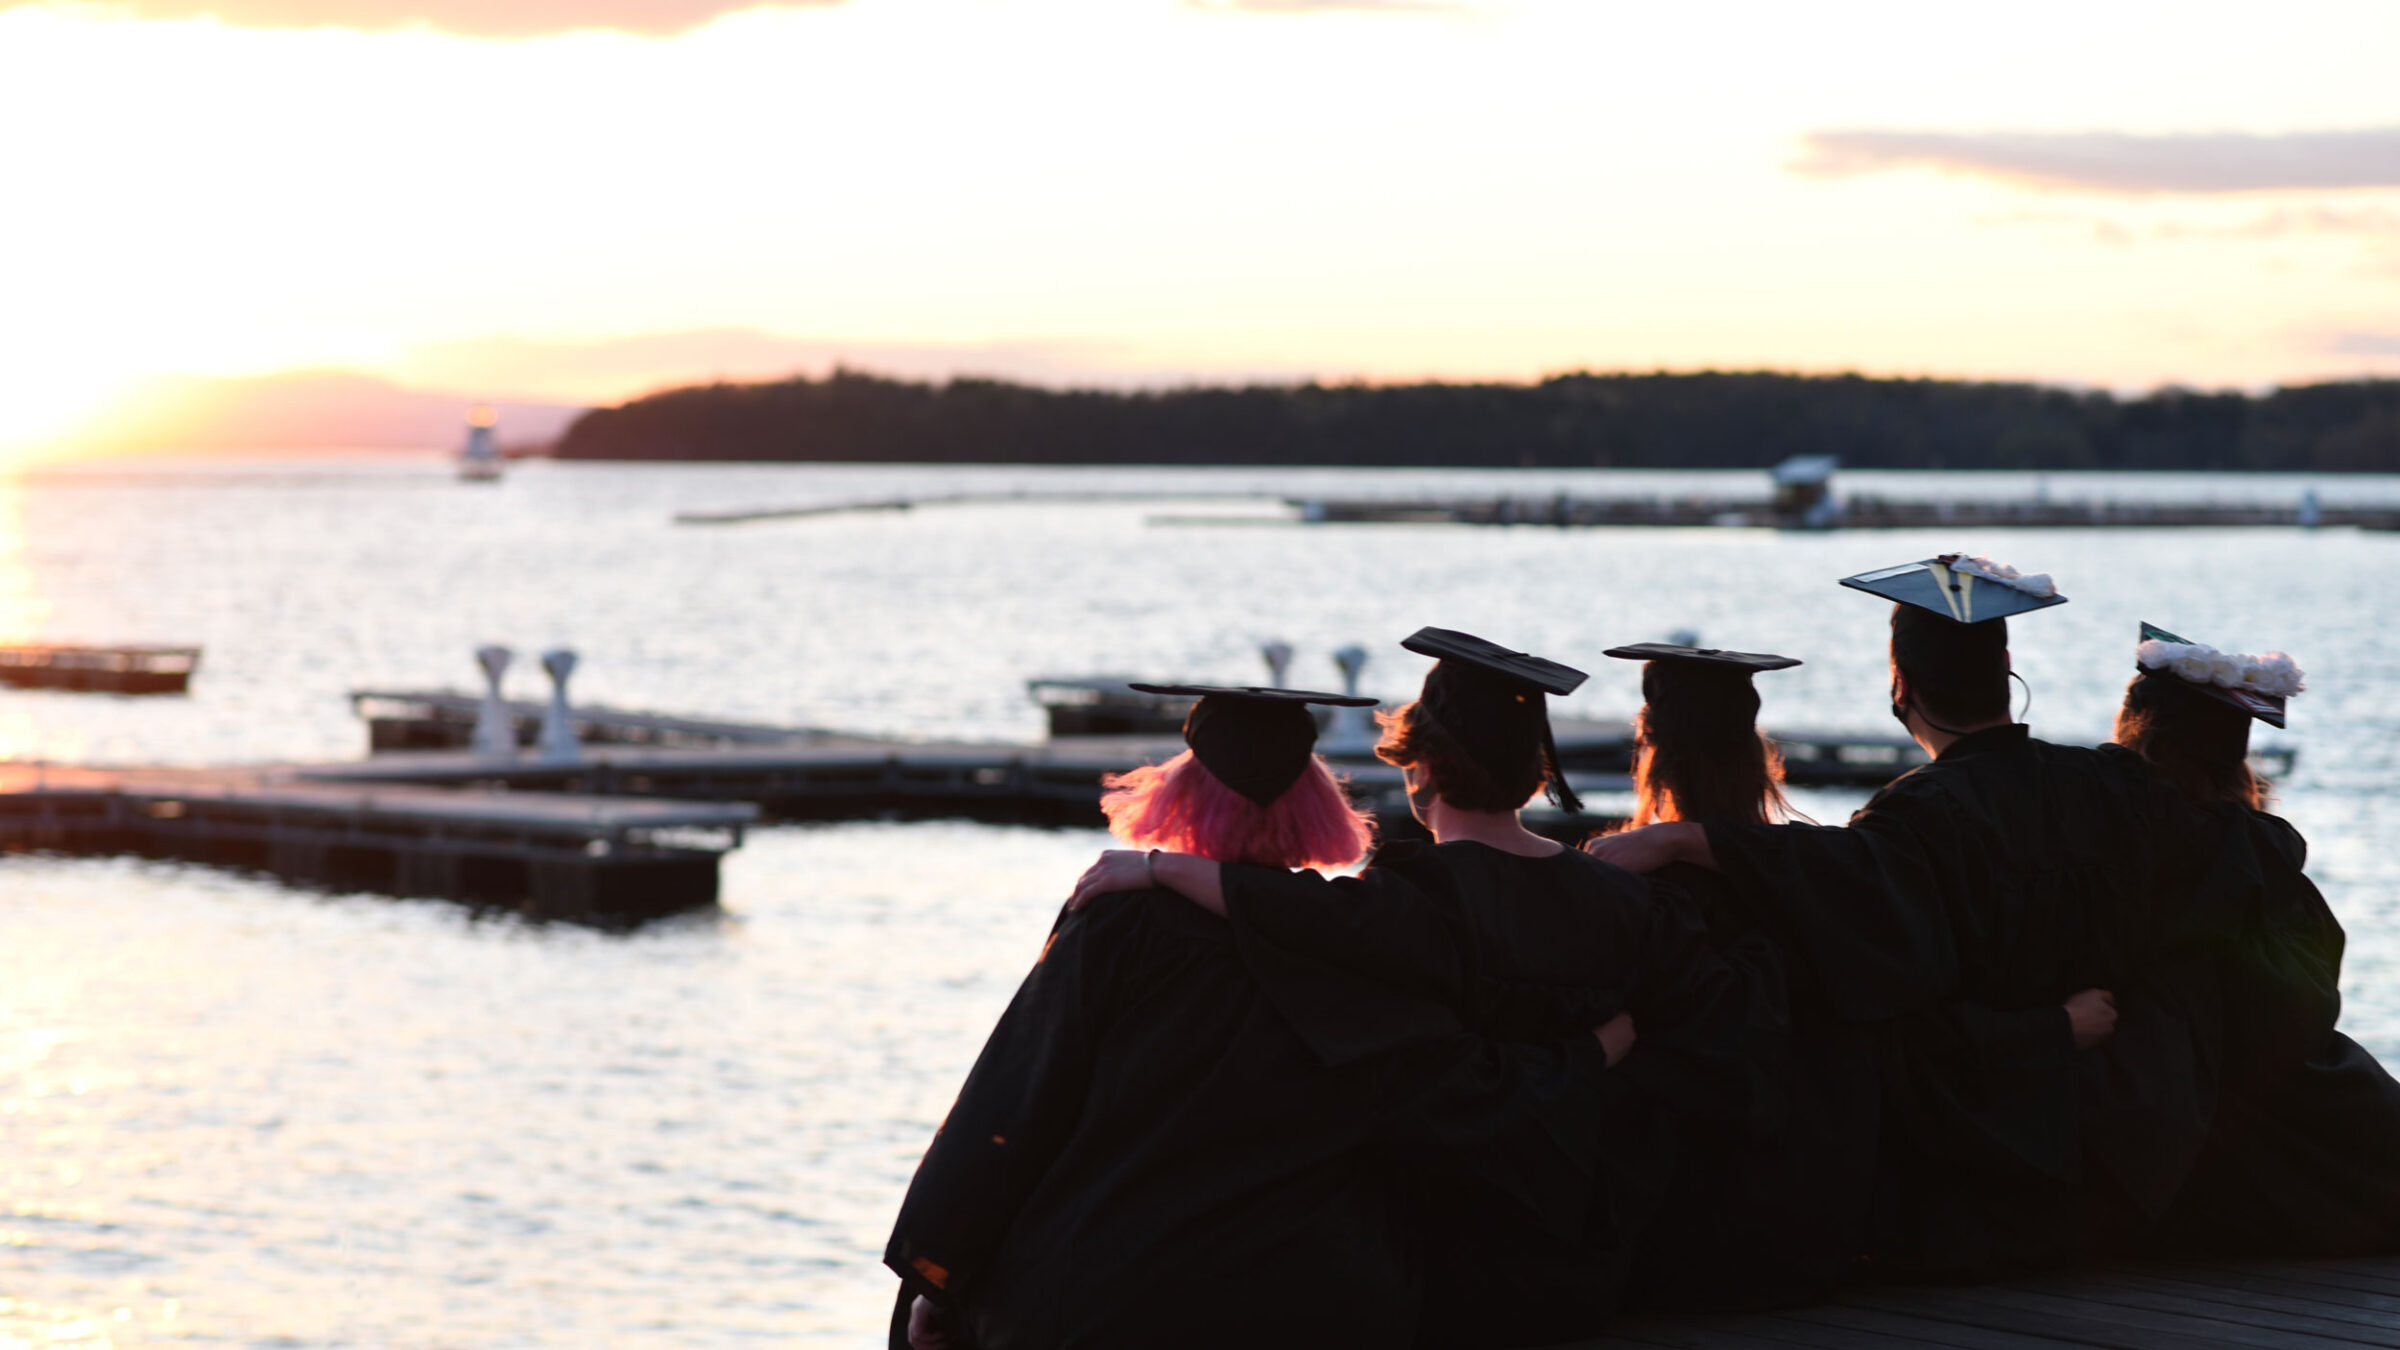 Five Champlain graduates huddle together and watch the sunset over Lake Champlain in their caps and gowns.